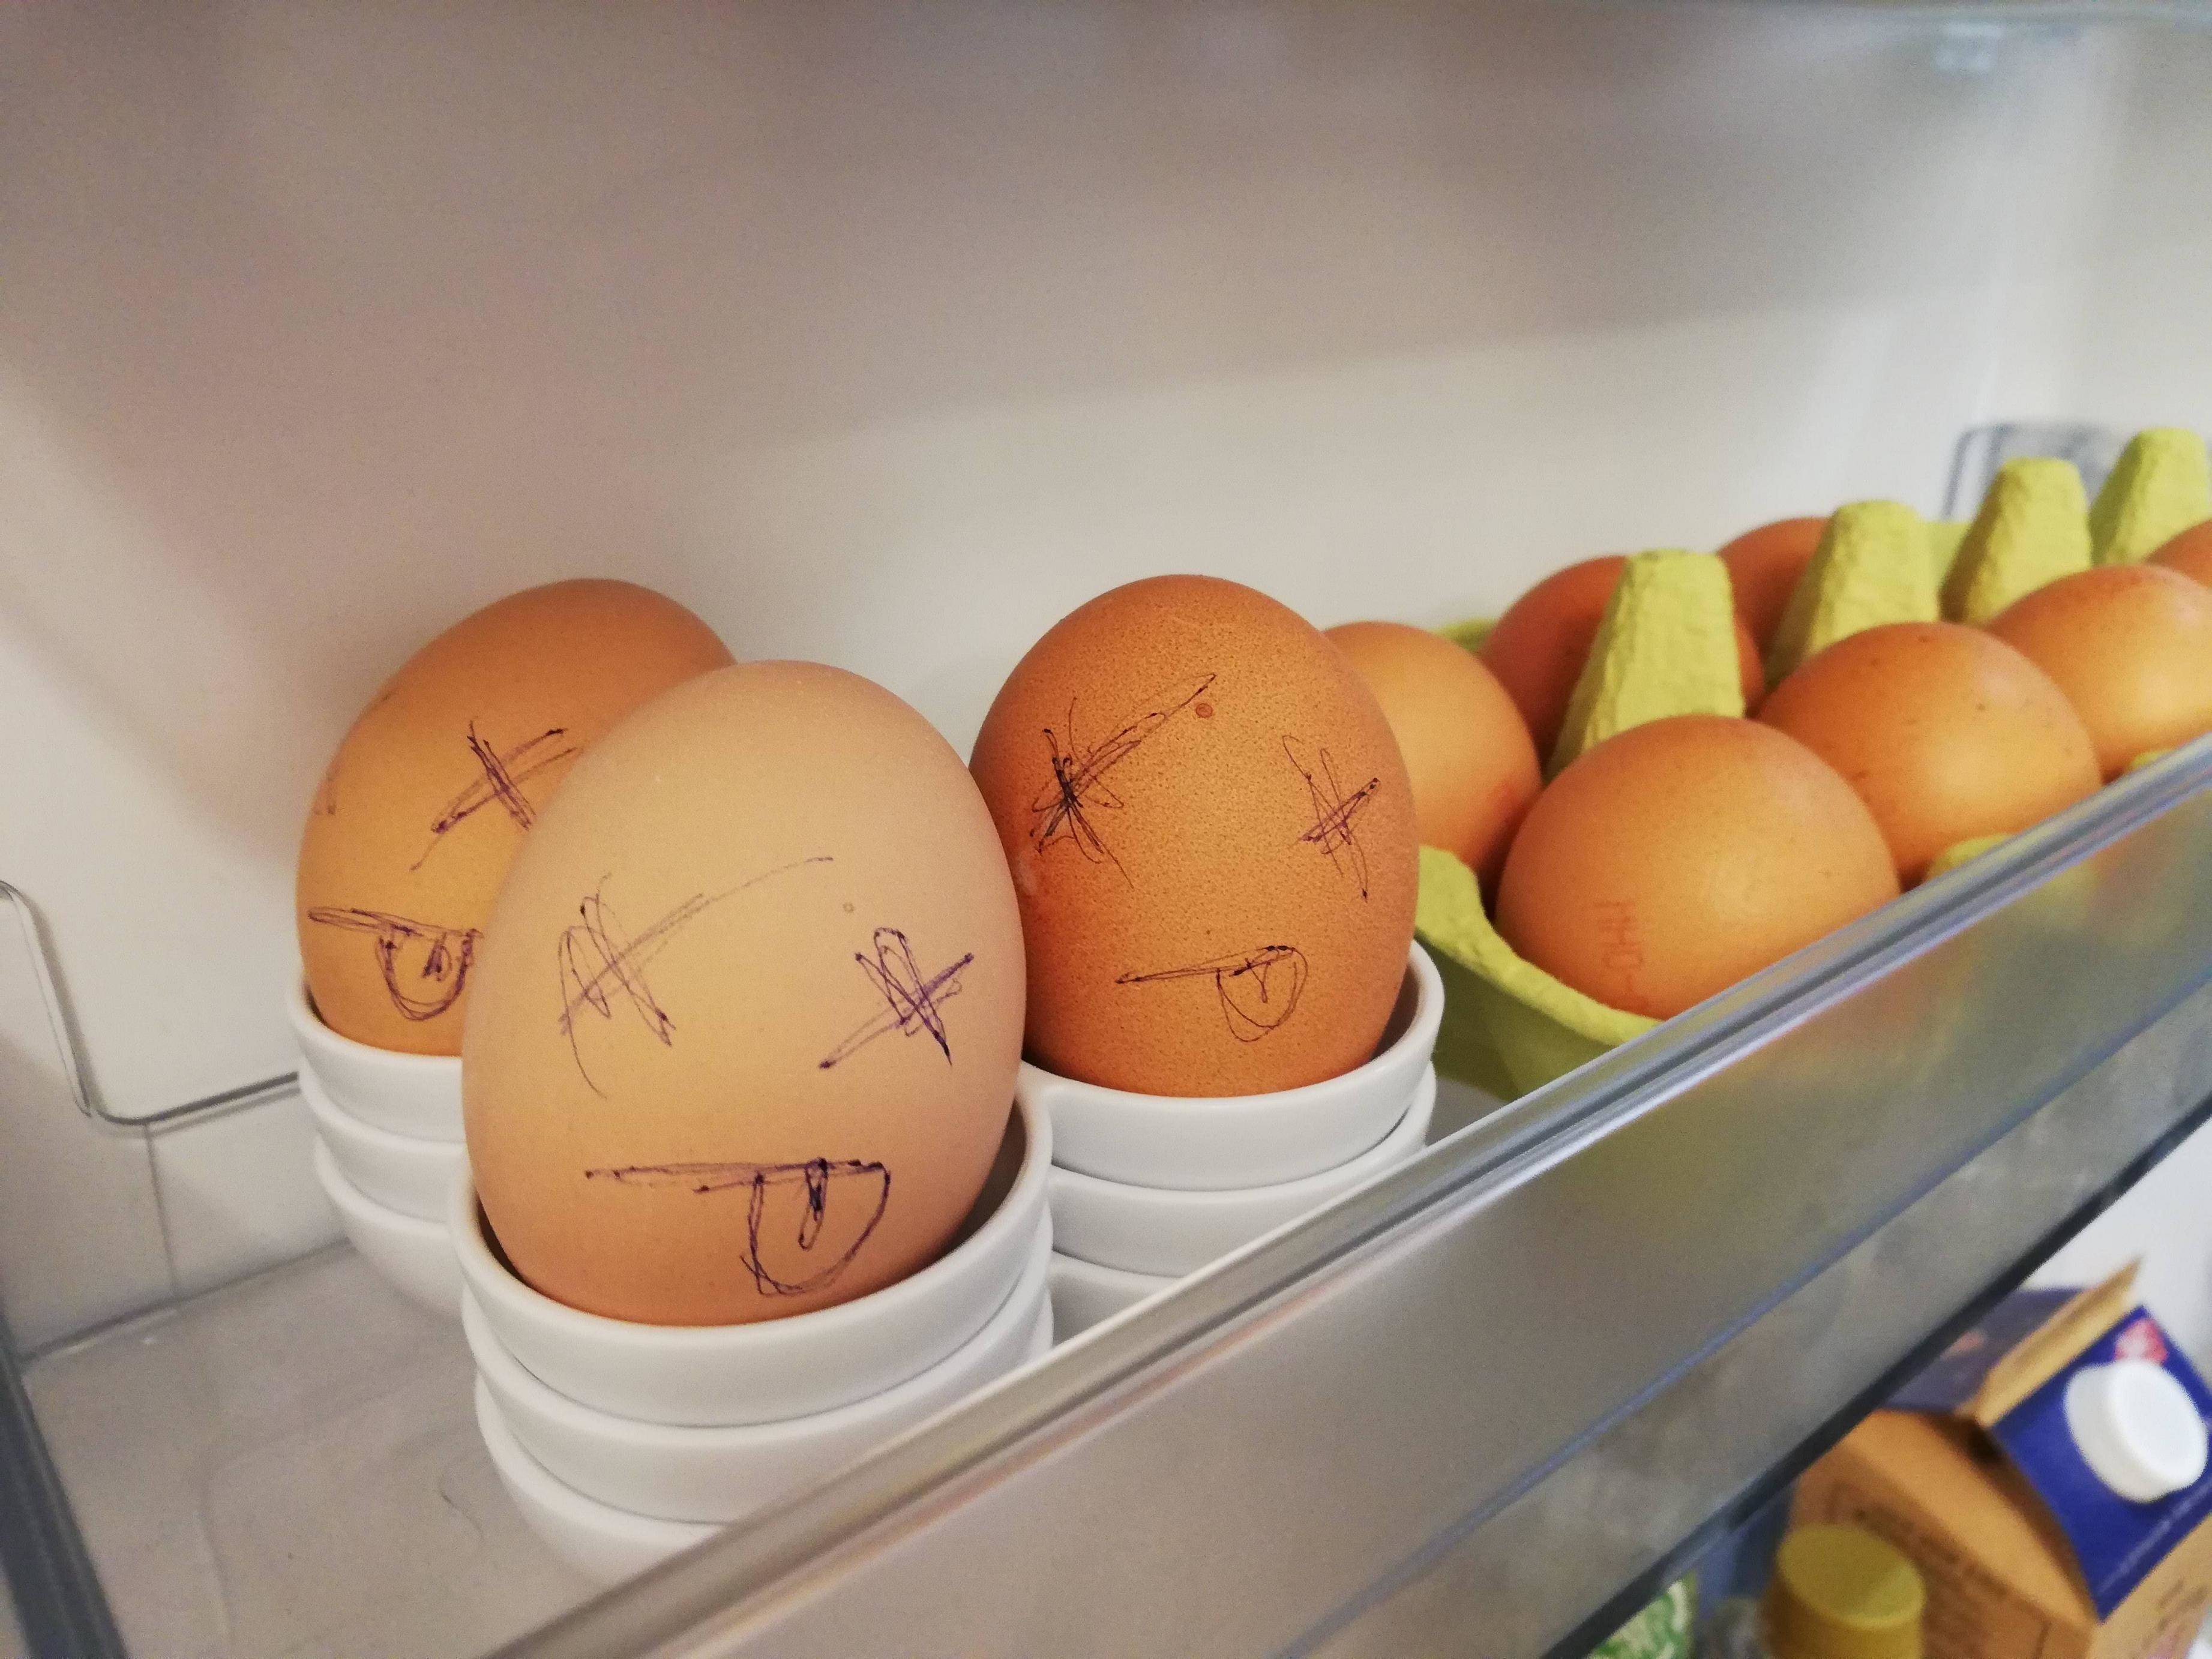 Drawing on eggs